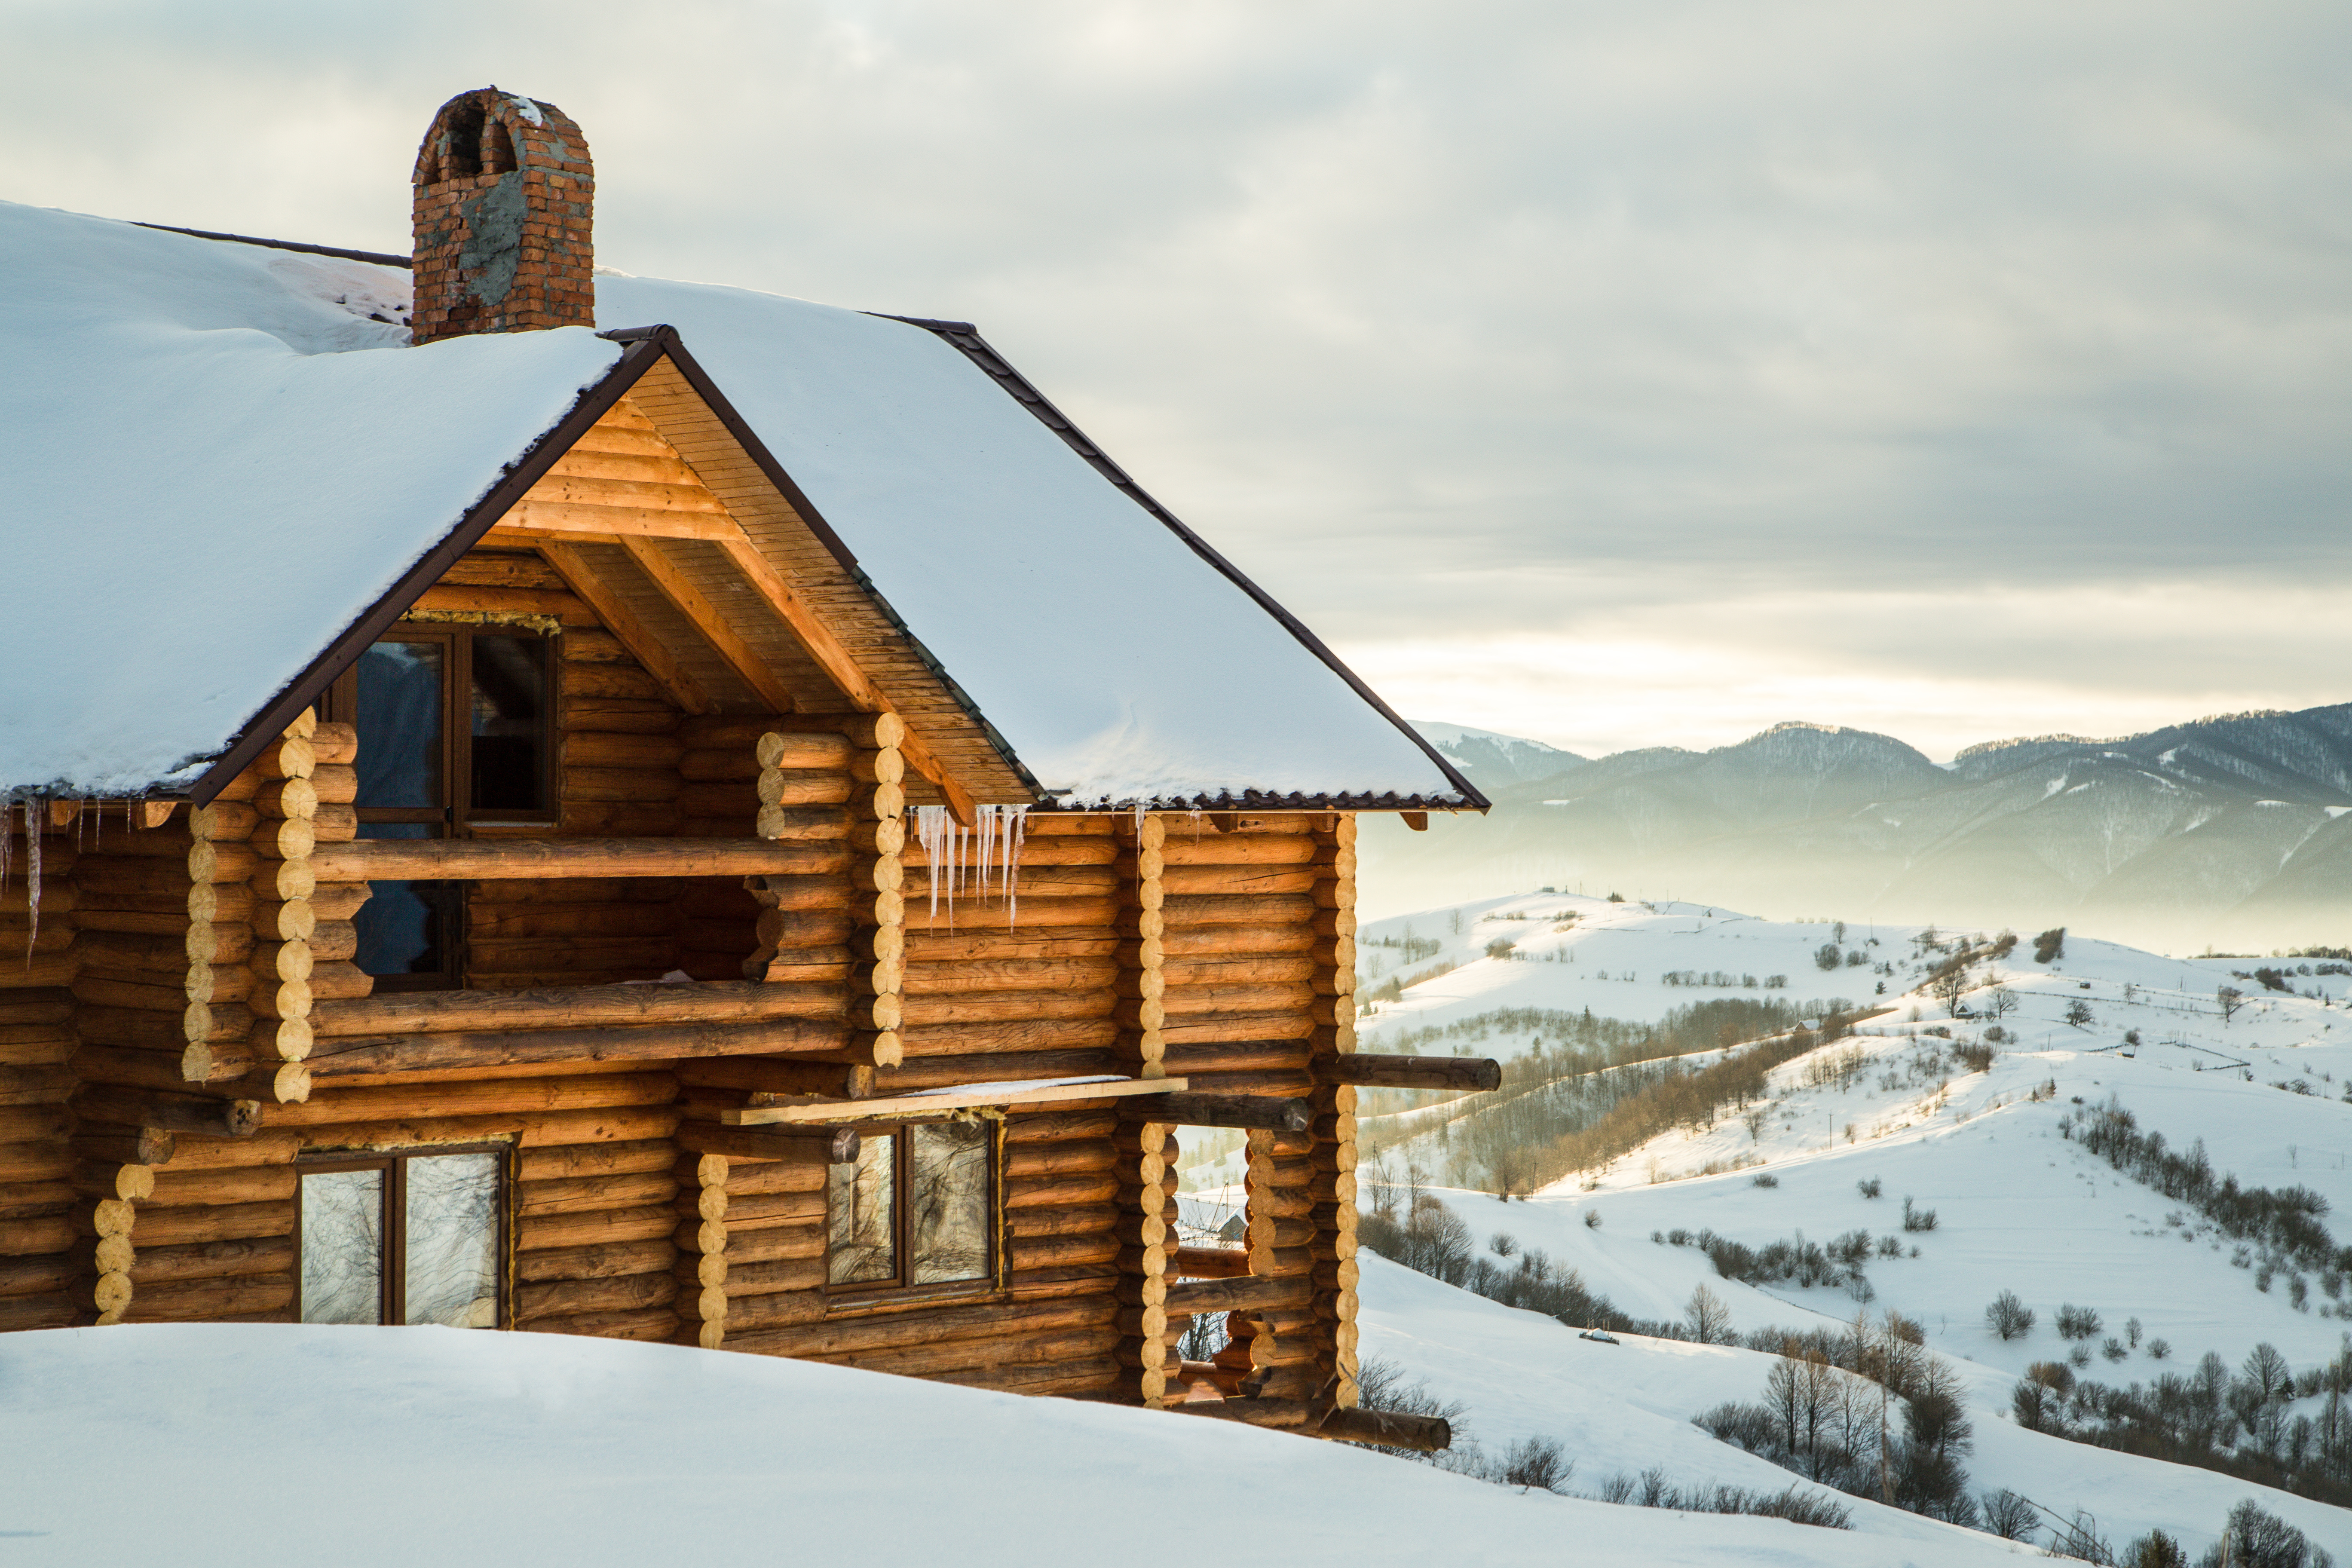 How to Buy a Seasonal Access Property in the Mountains